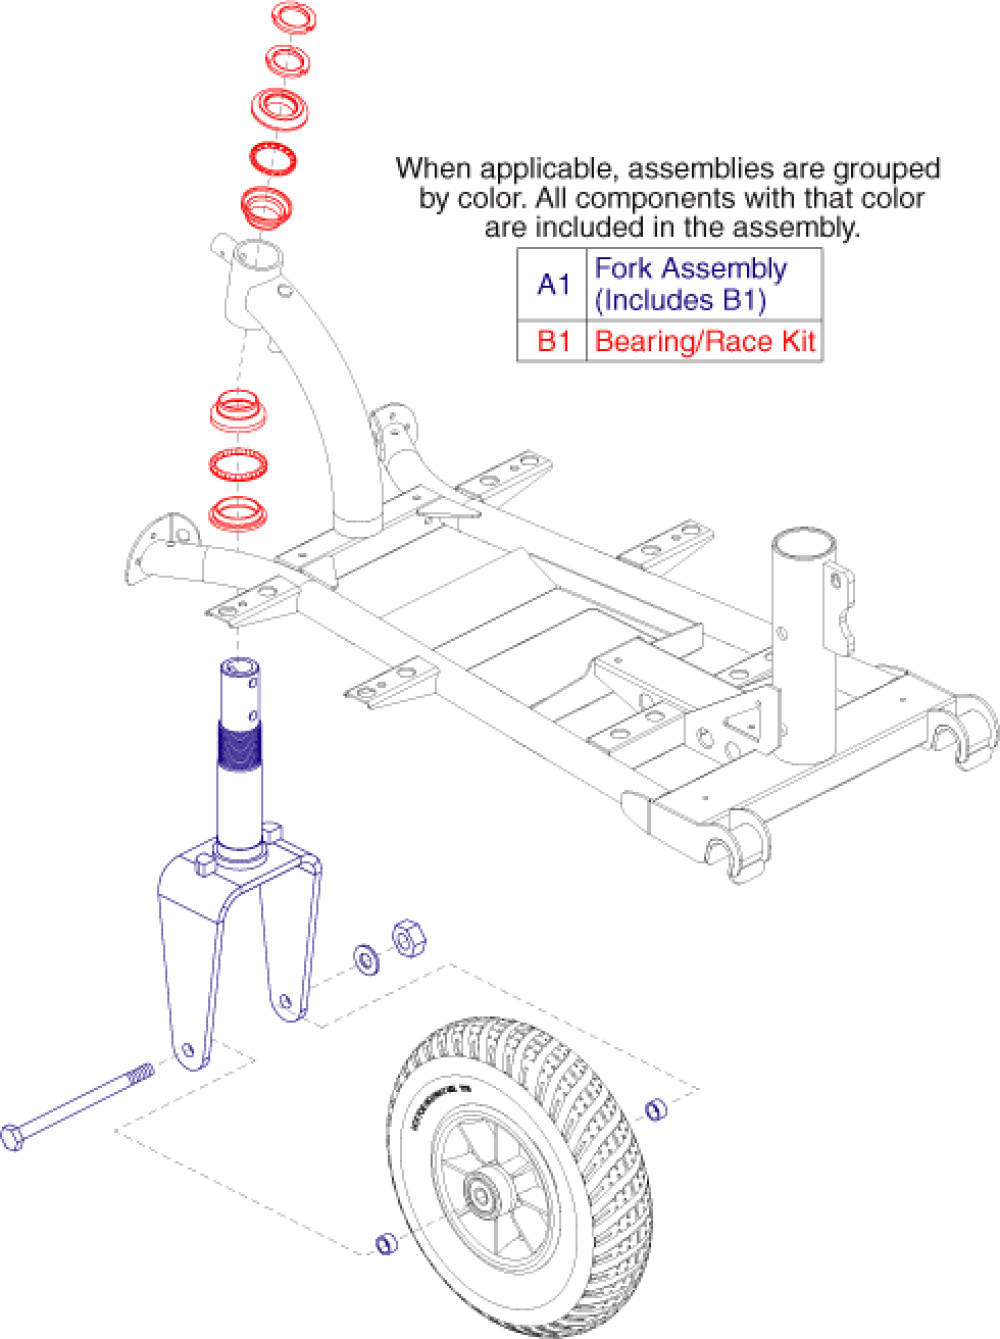 Fork Assembly W/ Black Tire parts diagram